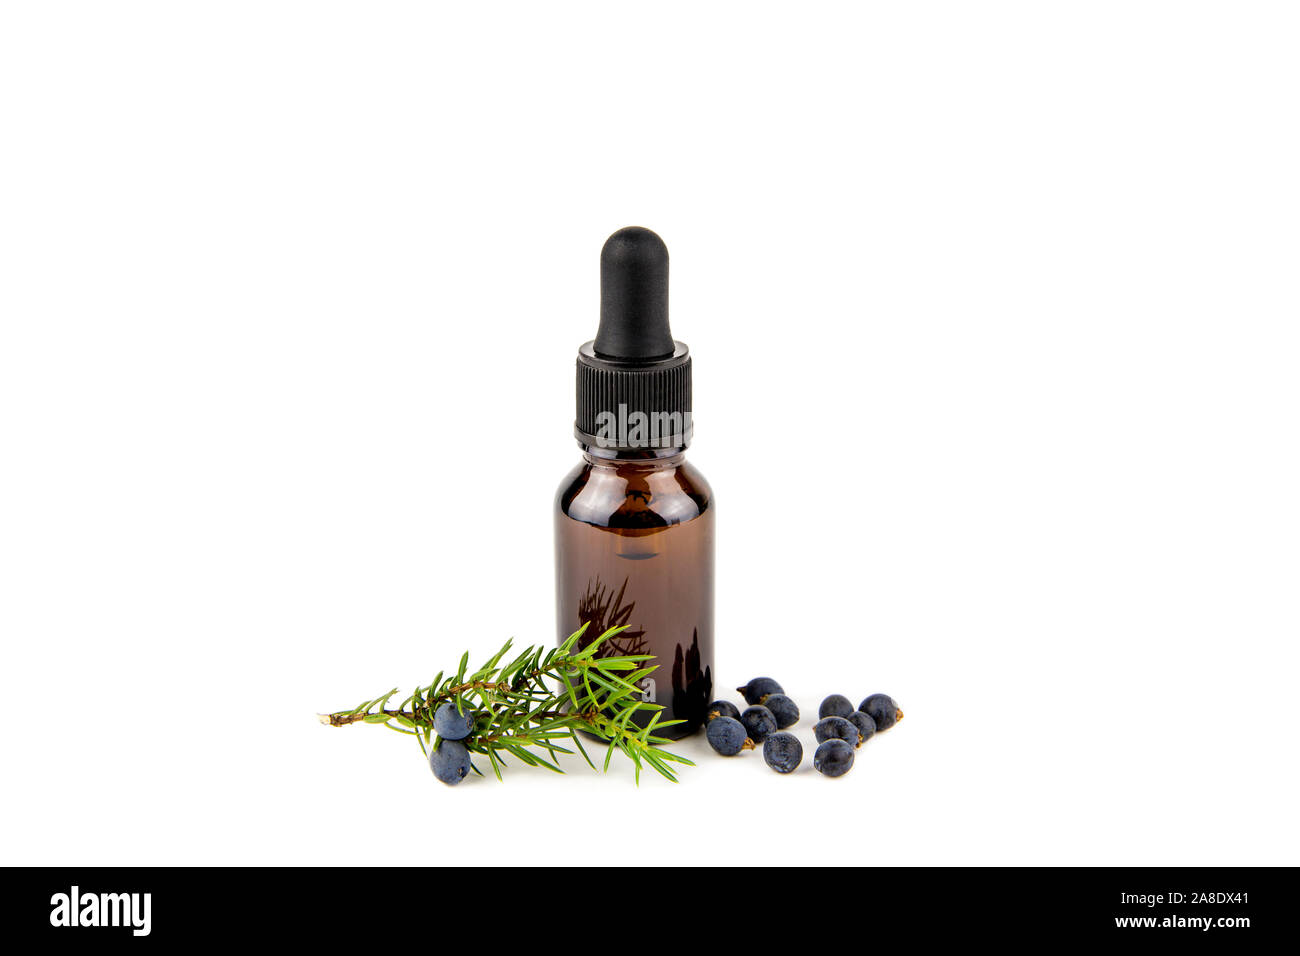 Juniper latin Juniperus communis berry essential oil in brown dropper bottle, juniper tree branch with confier cones and berries scattered around, iso Stock Photo